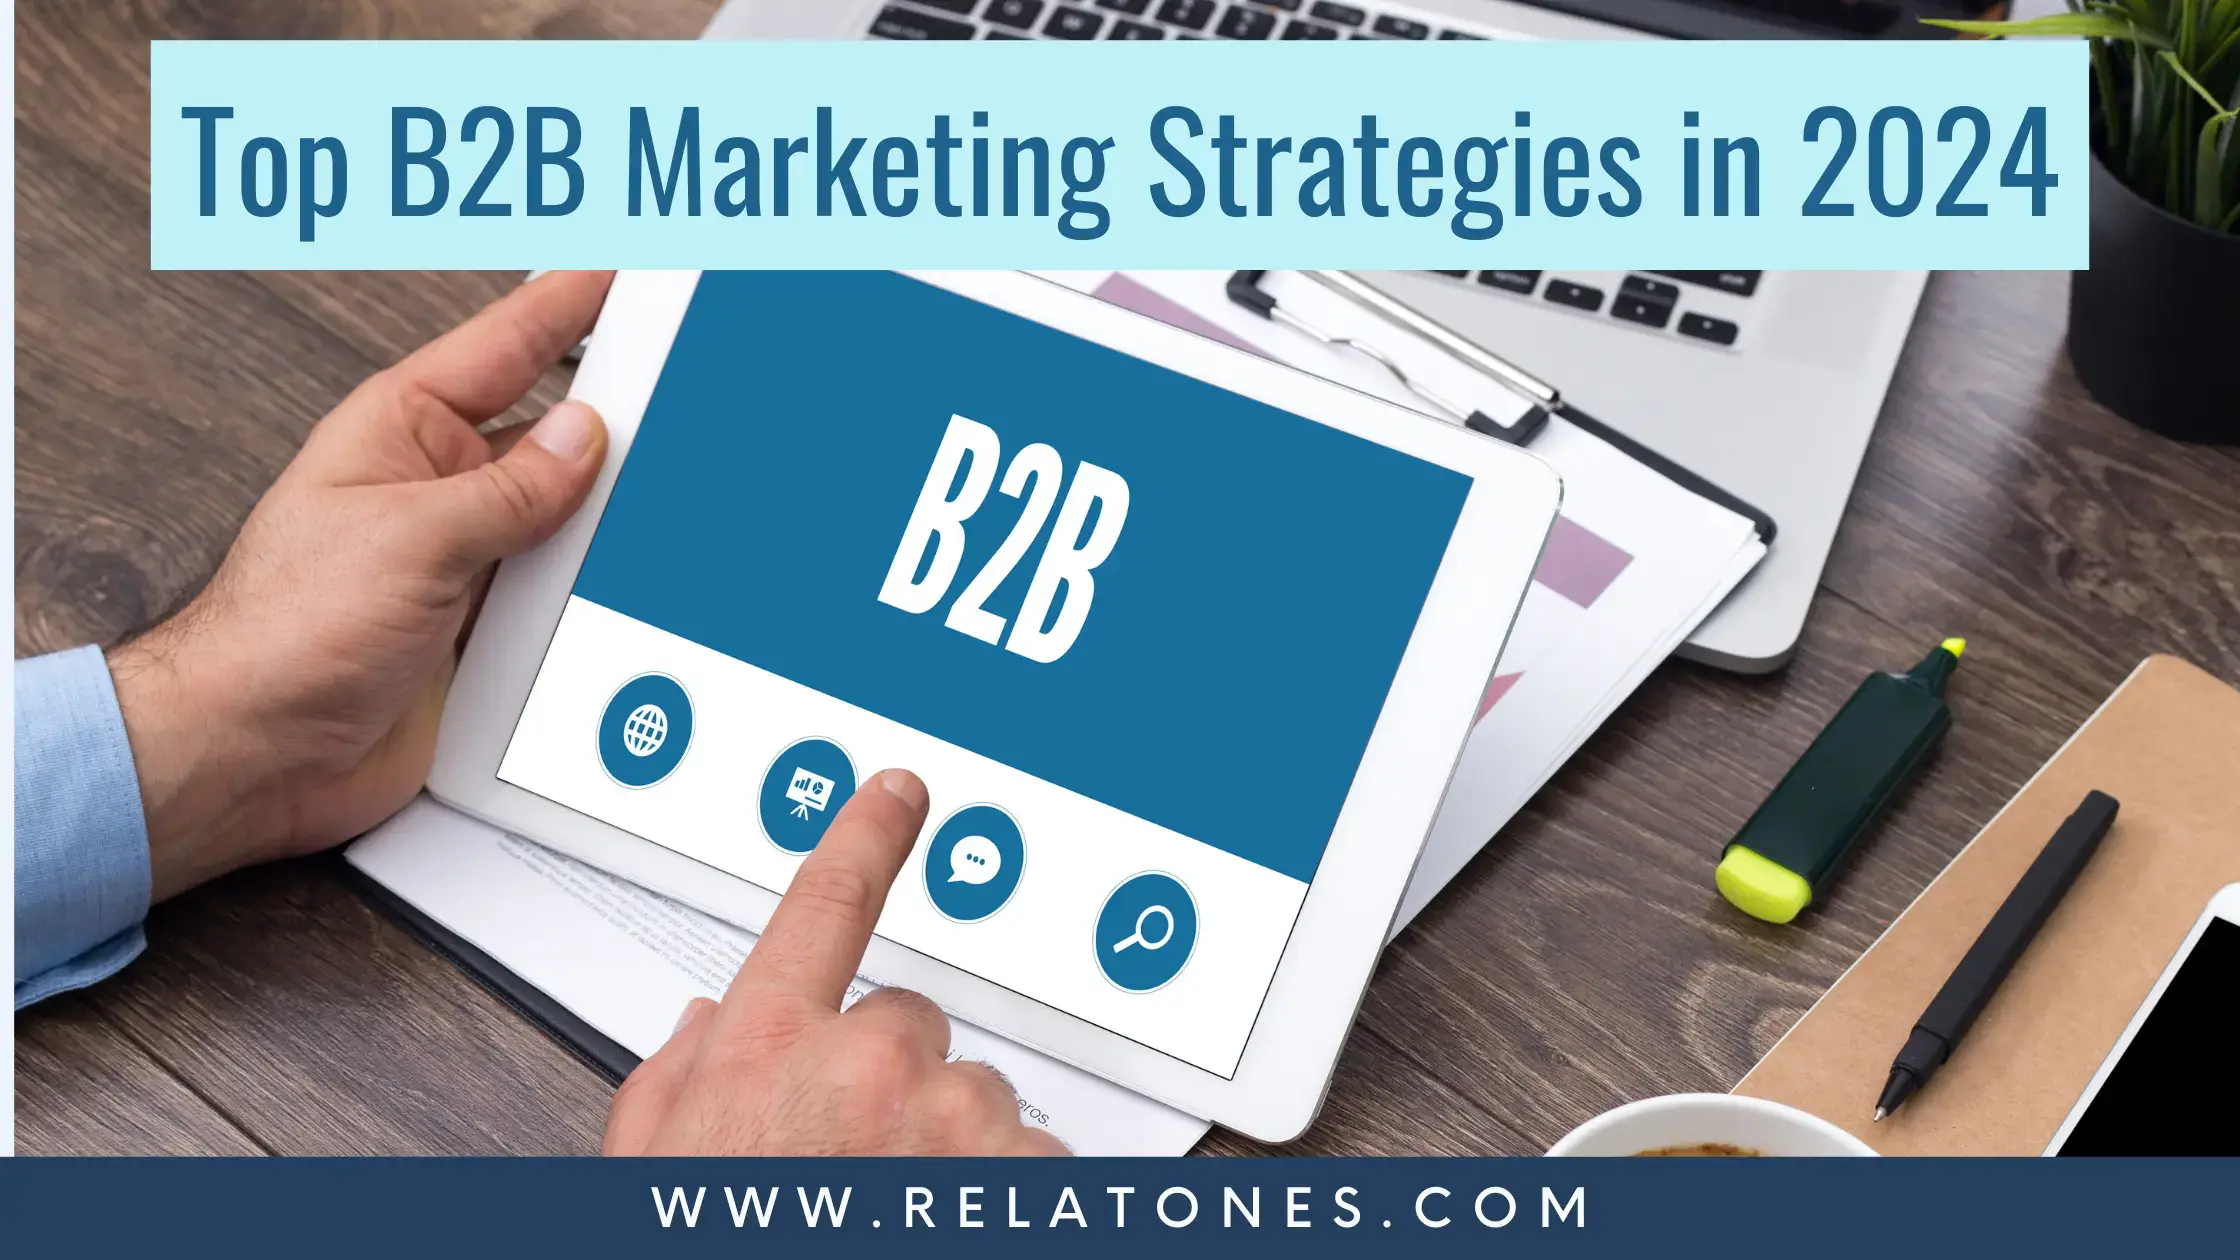 This image tells us about b2b marketing professional services, and also 10 Best B2B Marketing Strategies for Professional Services Firms in 2024,b2b marketing tactics 2024, and also how to outsource b2b marketing services 2024